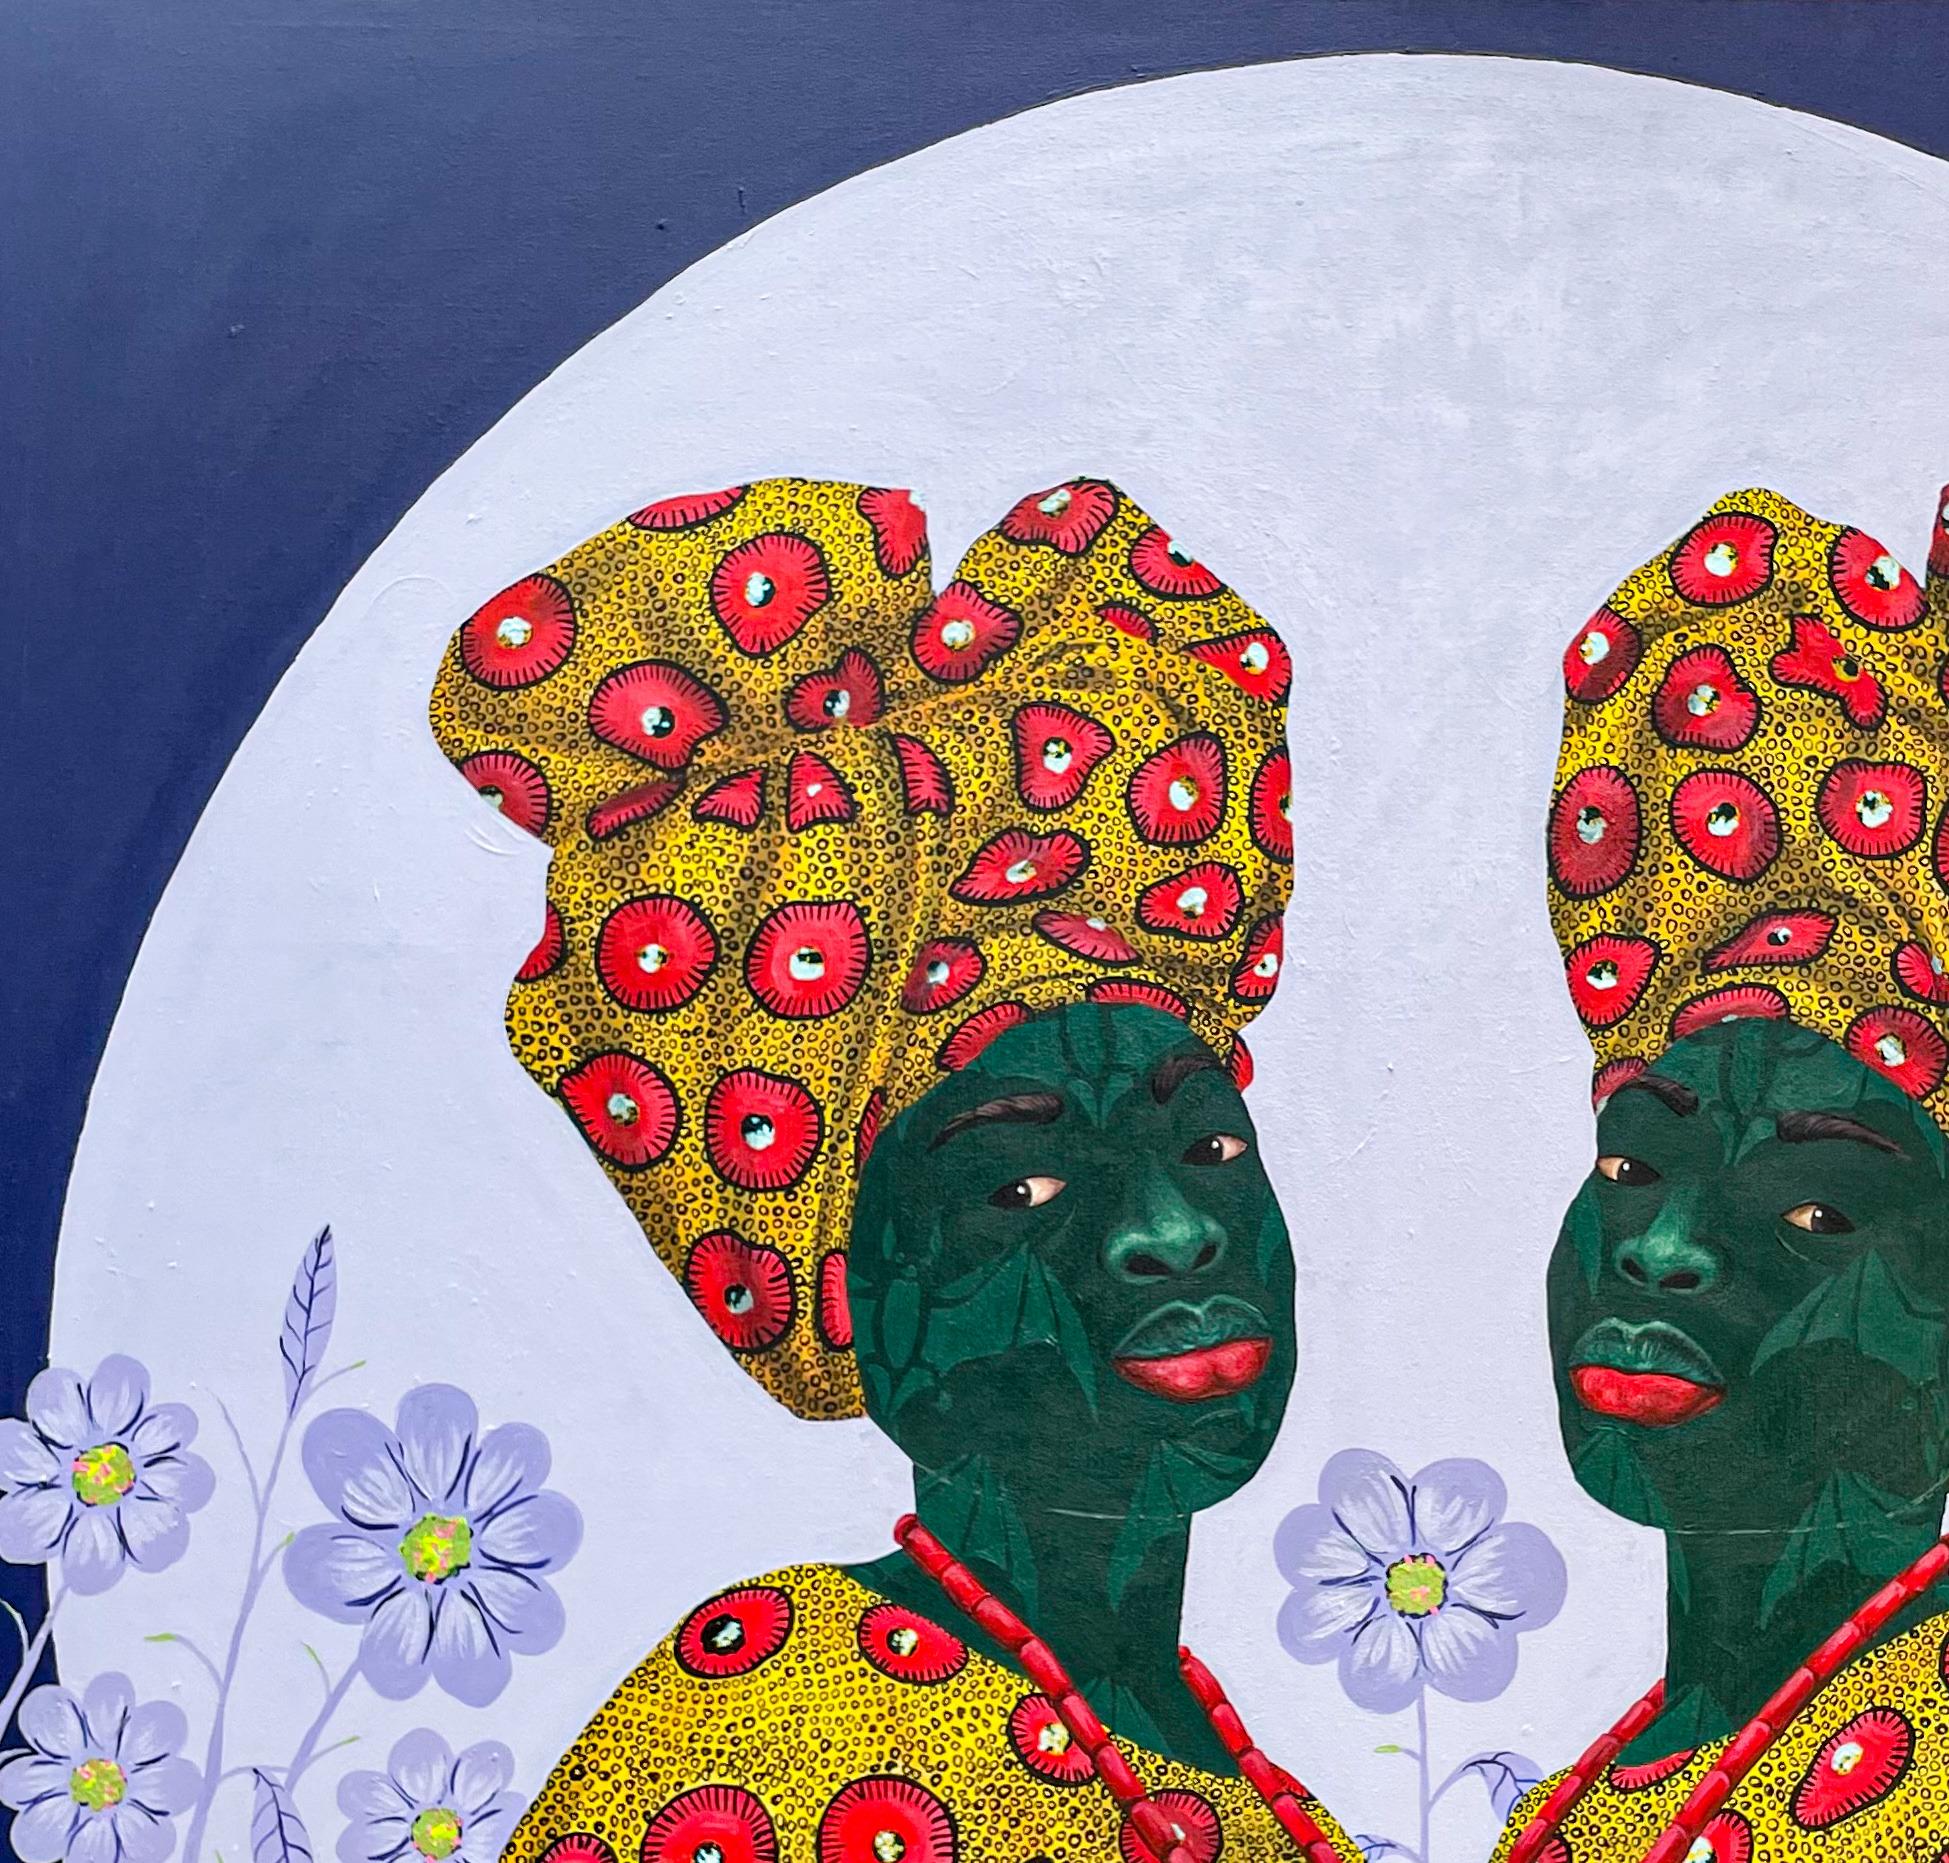 Sisters in Yellow 2 - Painting by Oluwafemi Afolabi